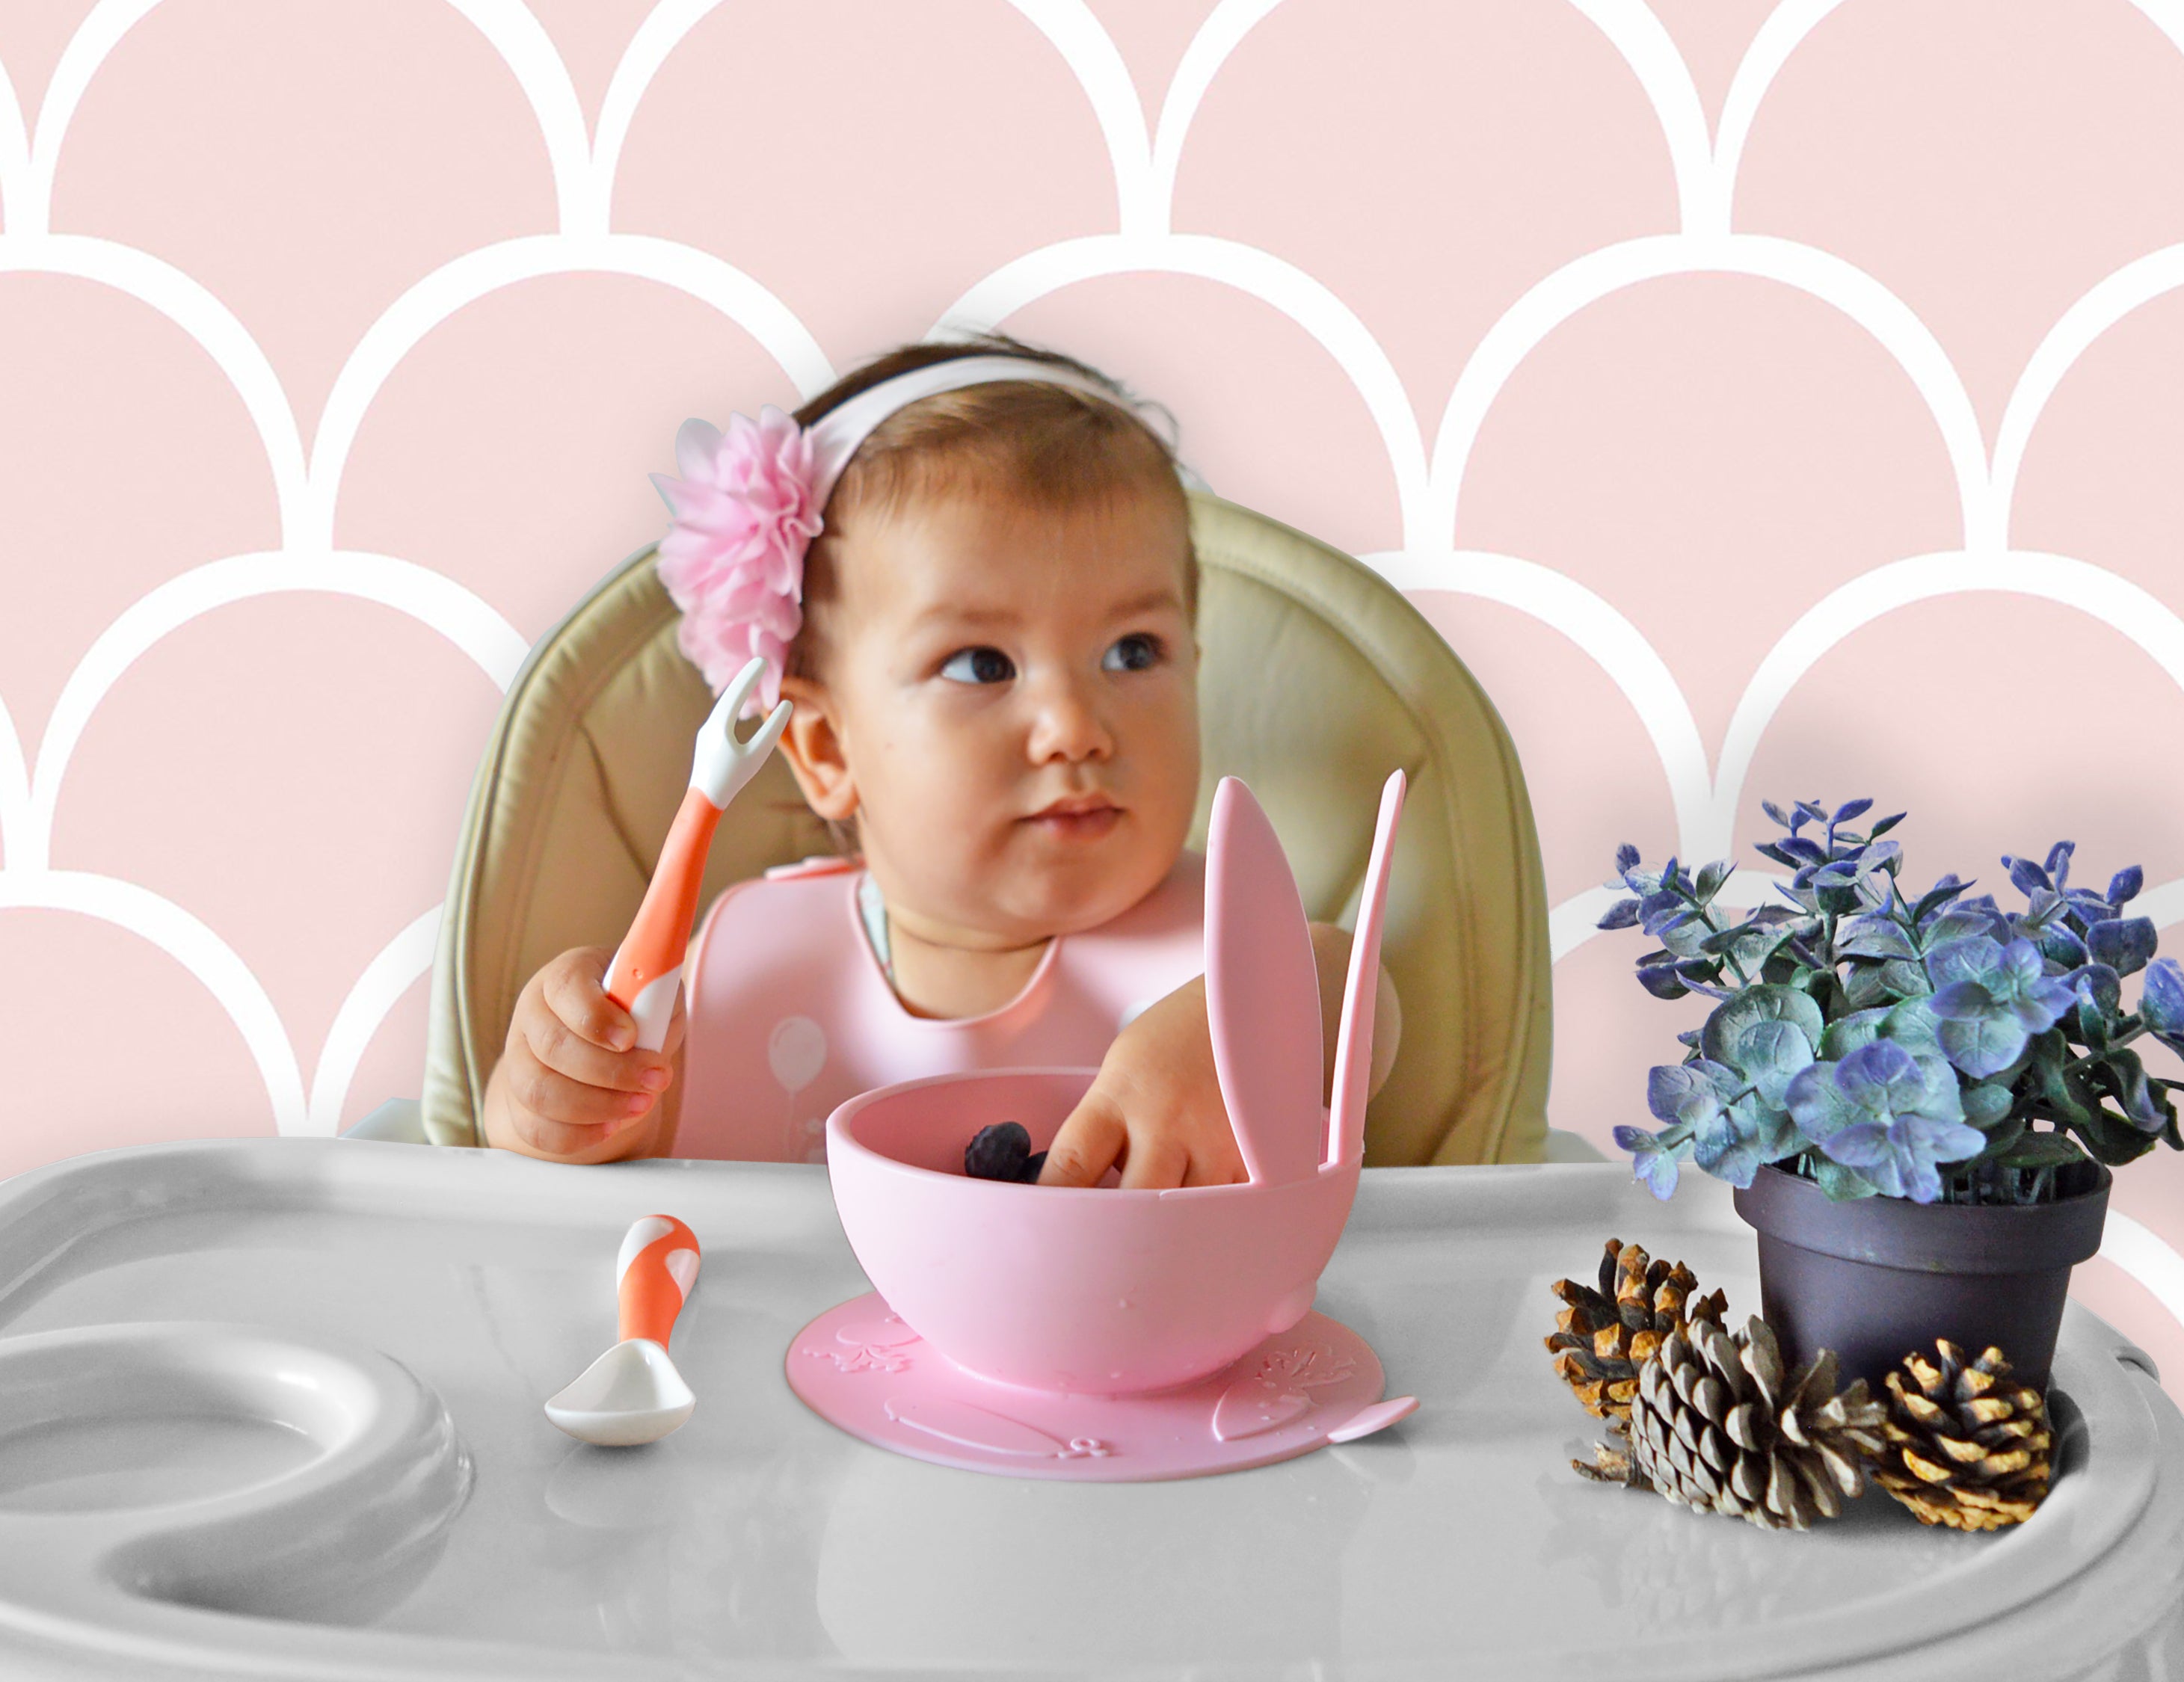 Baby-Led Weaning Spoons: Which One Is The Best For Your Kid?